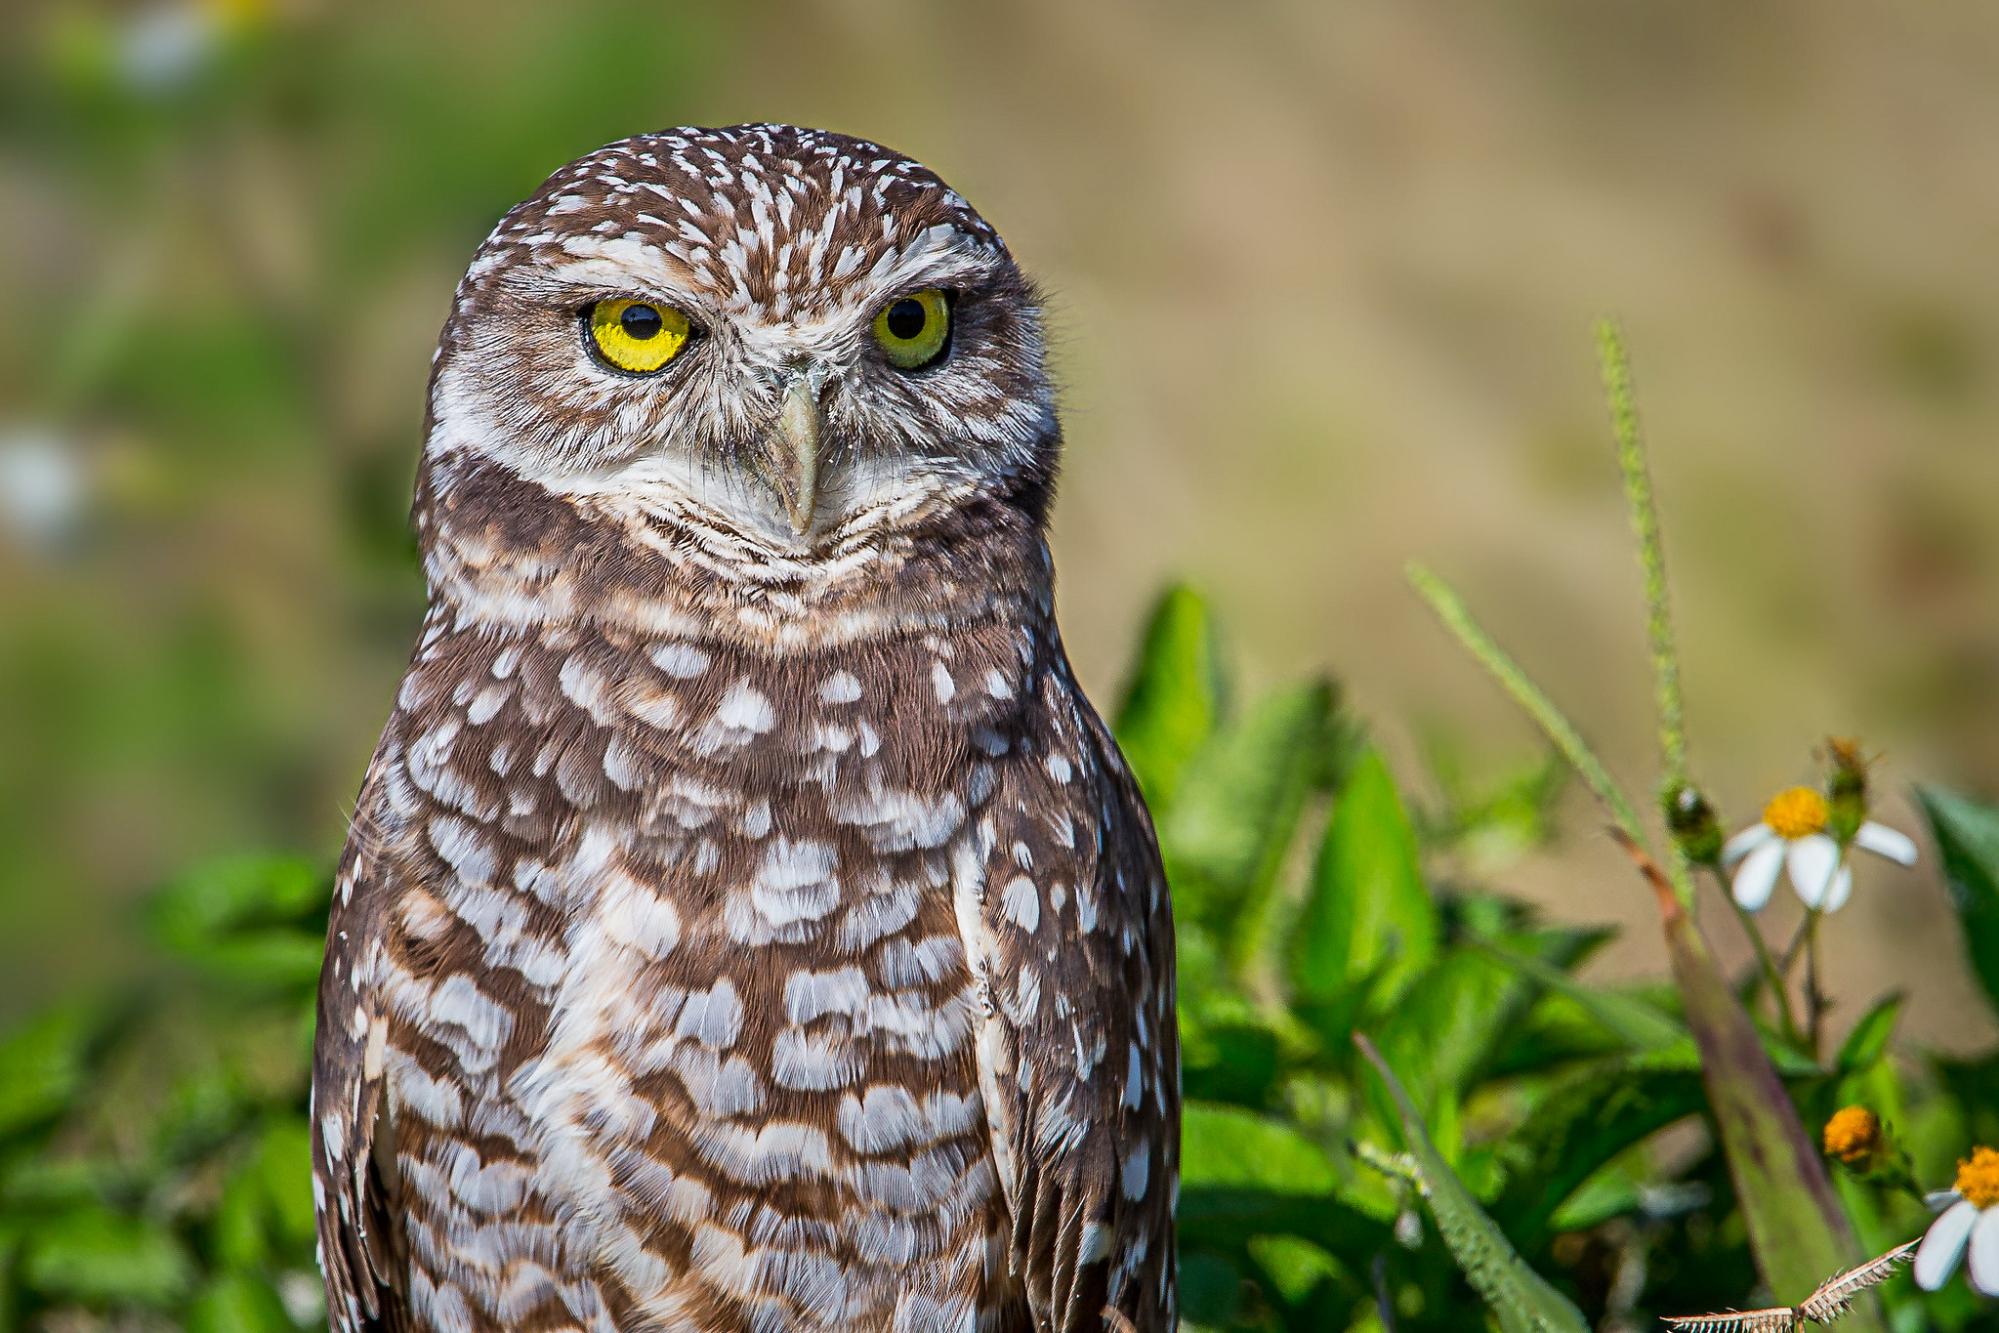 Tiny Burrowing Owls Find Safer Homes With the Help of Scientists